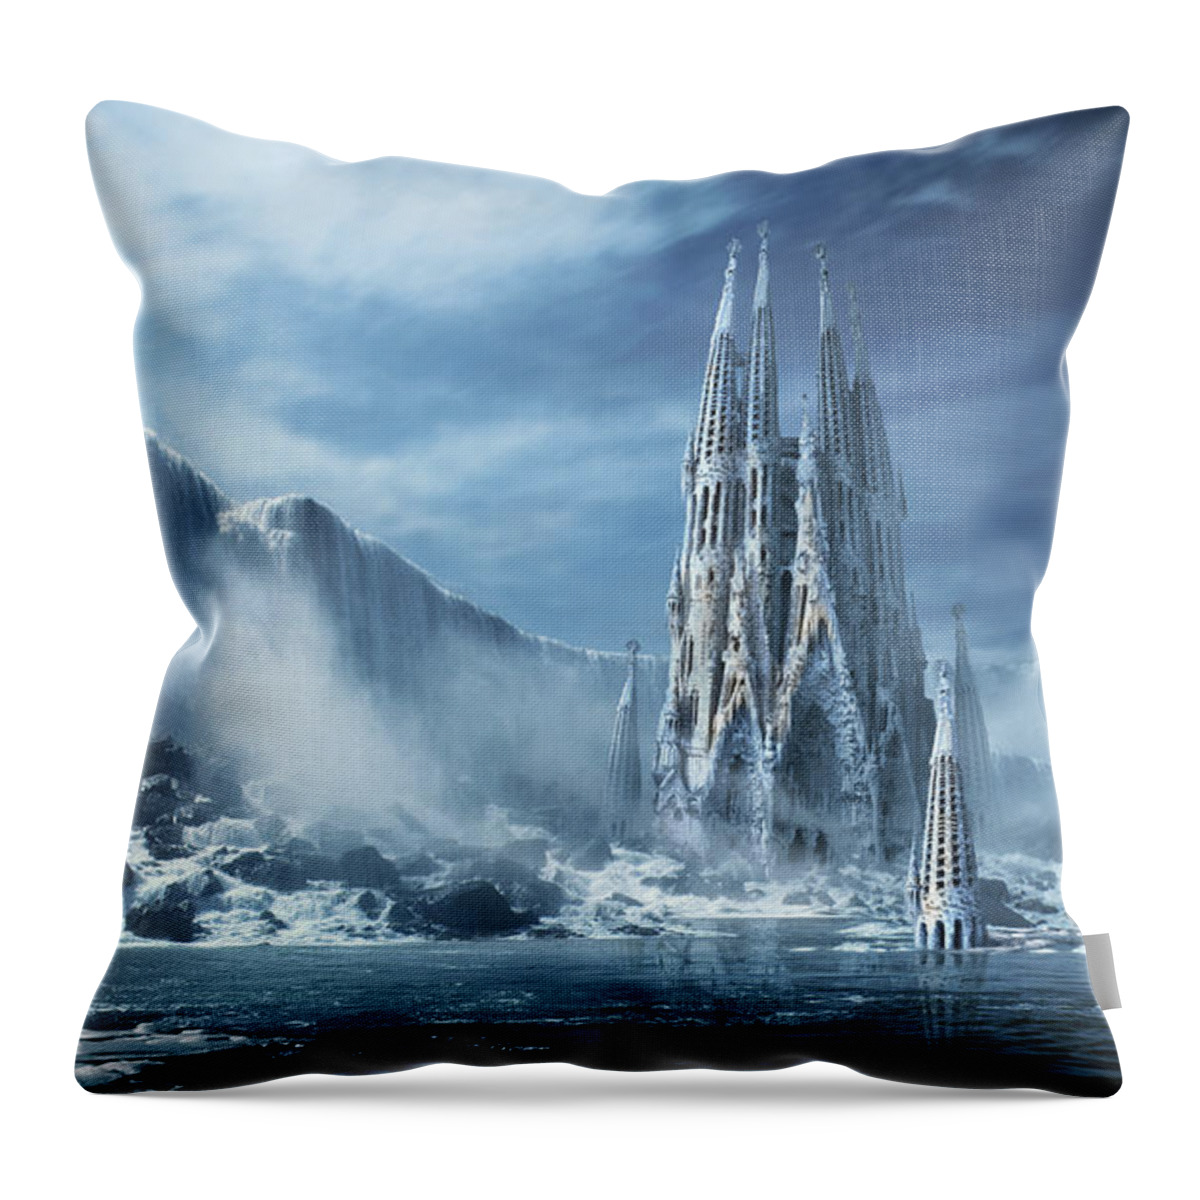 Gothic Art Fantasy Art Gothic Artwork Wallpaper Gallery Backgrounds Throw Pillow featuring the digital art Gothic fantasy or Expiatory temple by George Grie